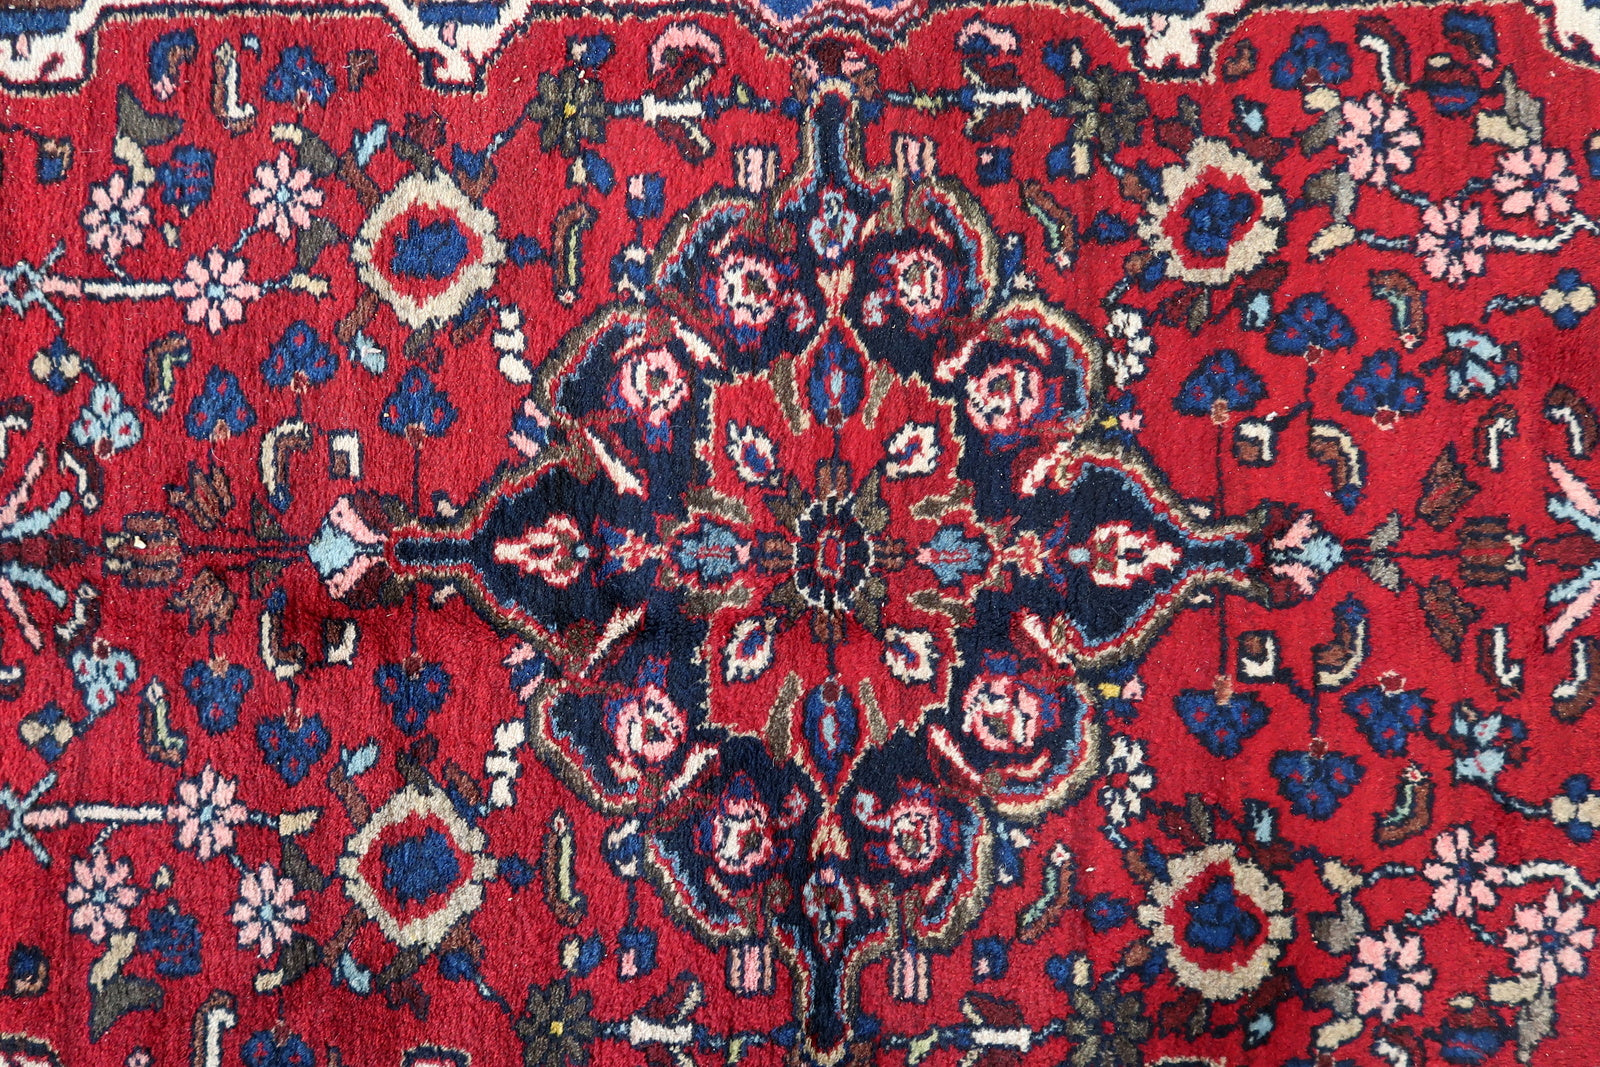 Close-up of rug's corner on Handmade Vintage Persian Malayer Rug - Detailed view capturing the corner of the rug with its design.